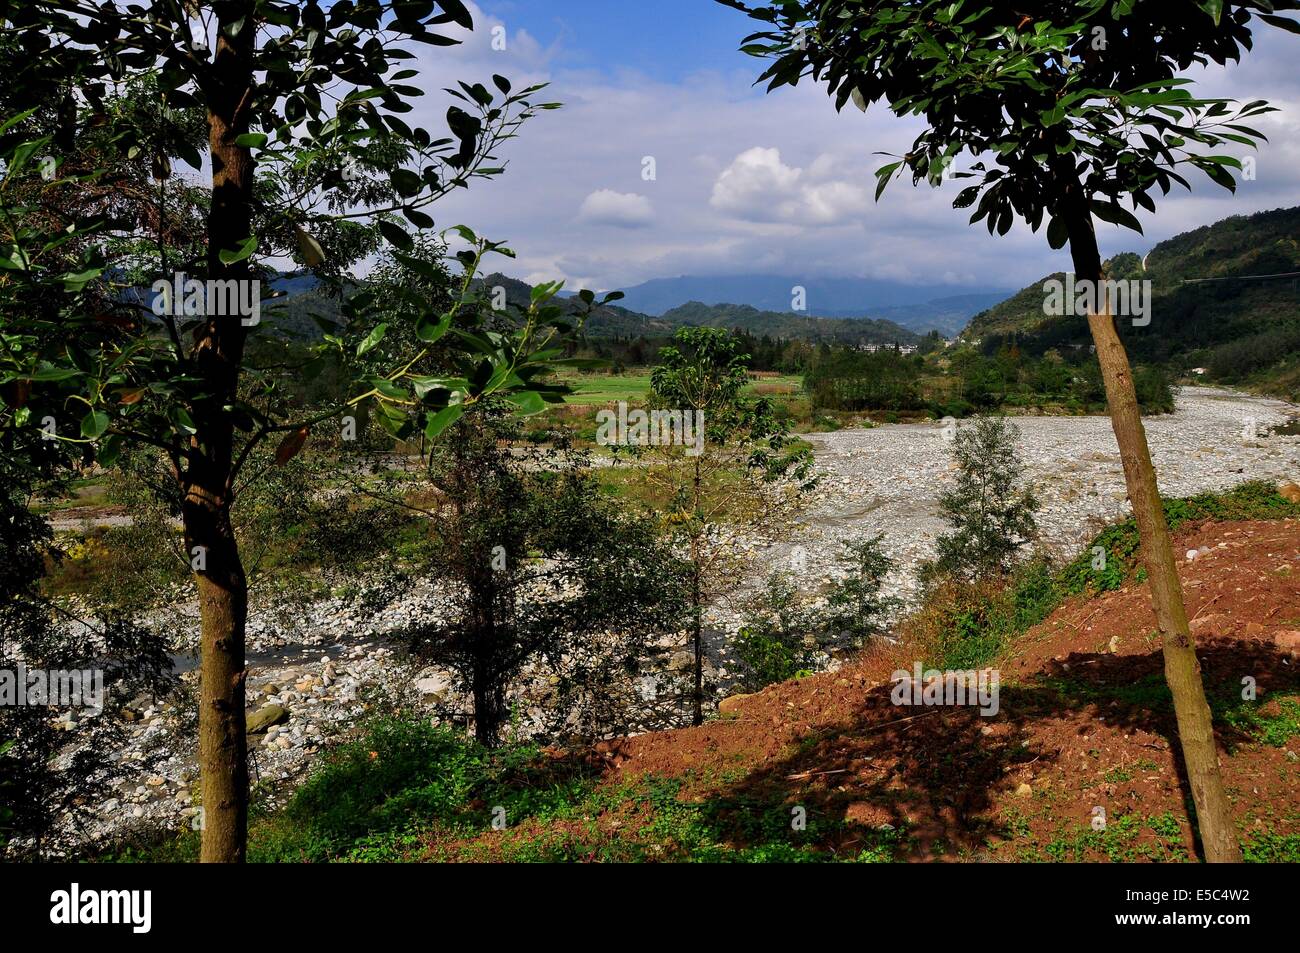 SICHUAN PROVINCE, CHINA:  View of the rock-strewn Jianjiang River, farm fields, and distant mountains Stock Photo